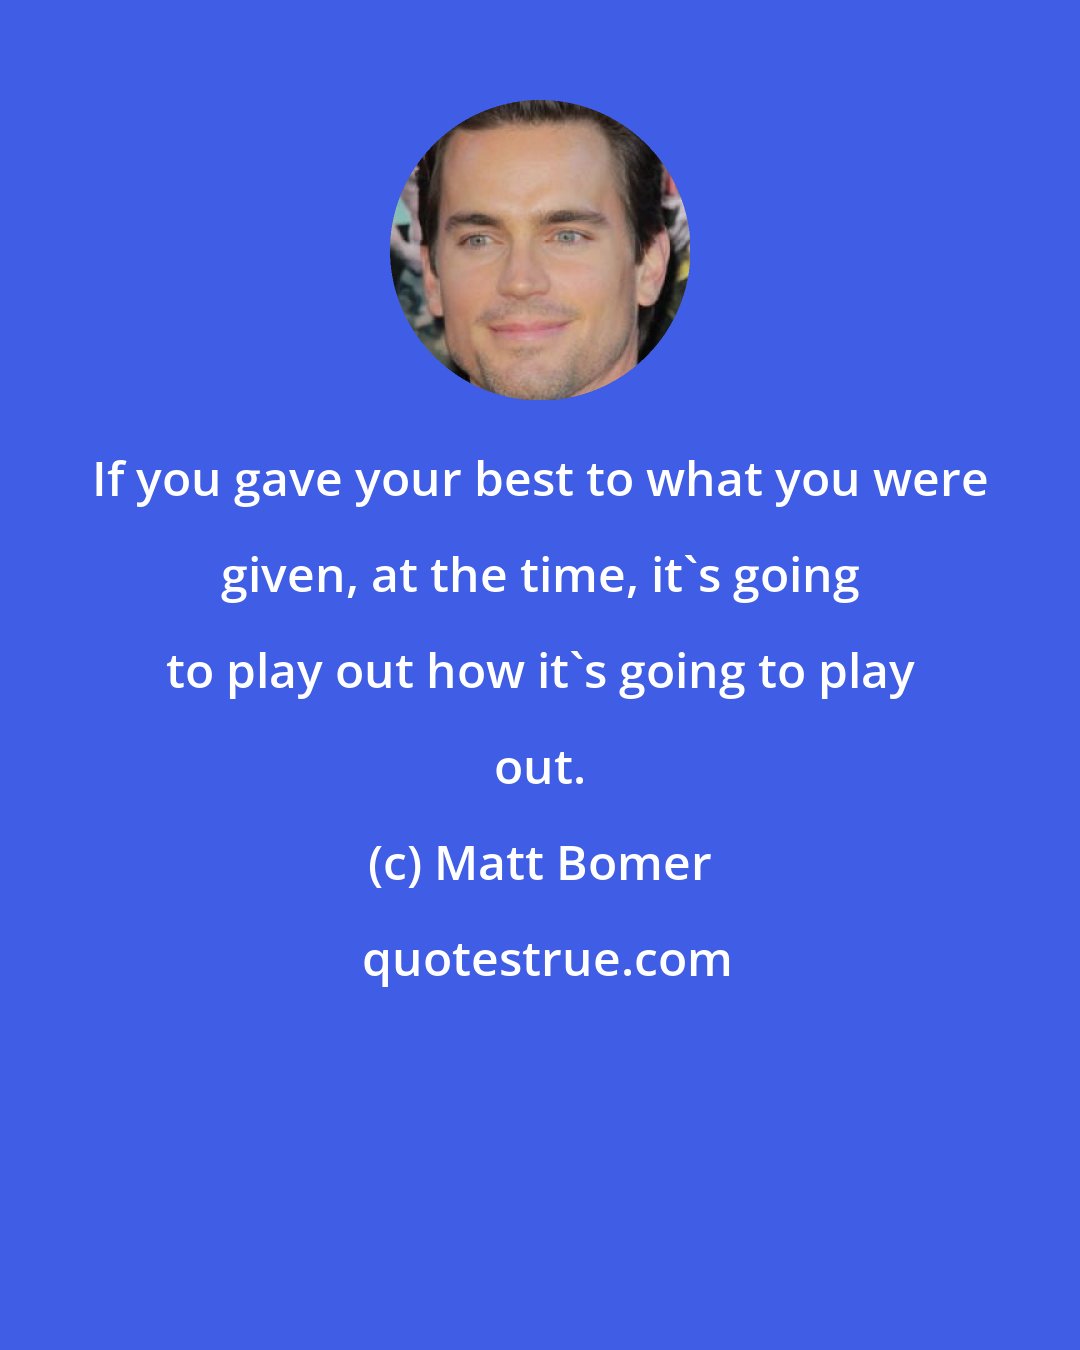 Matt Bomer: If you gave your best to what you were given, at the time, it's going to play out how it's going to play out.